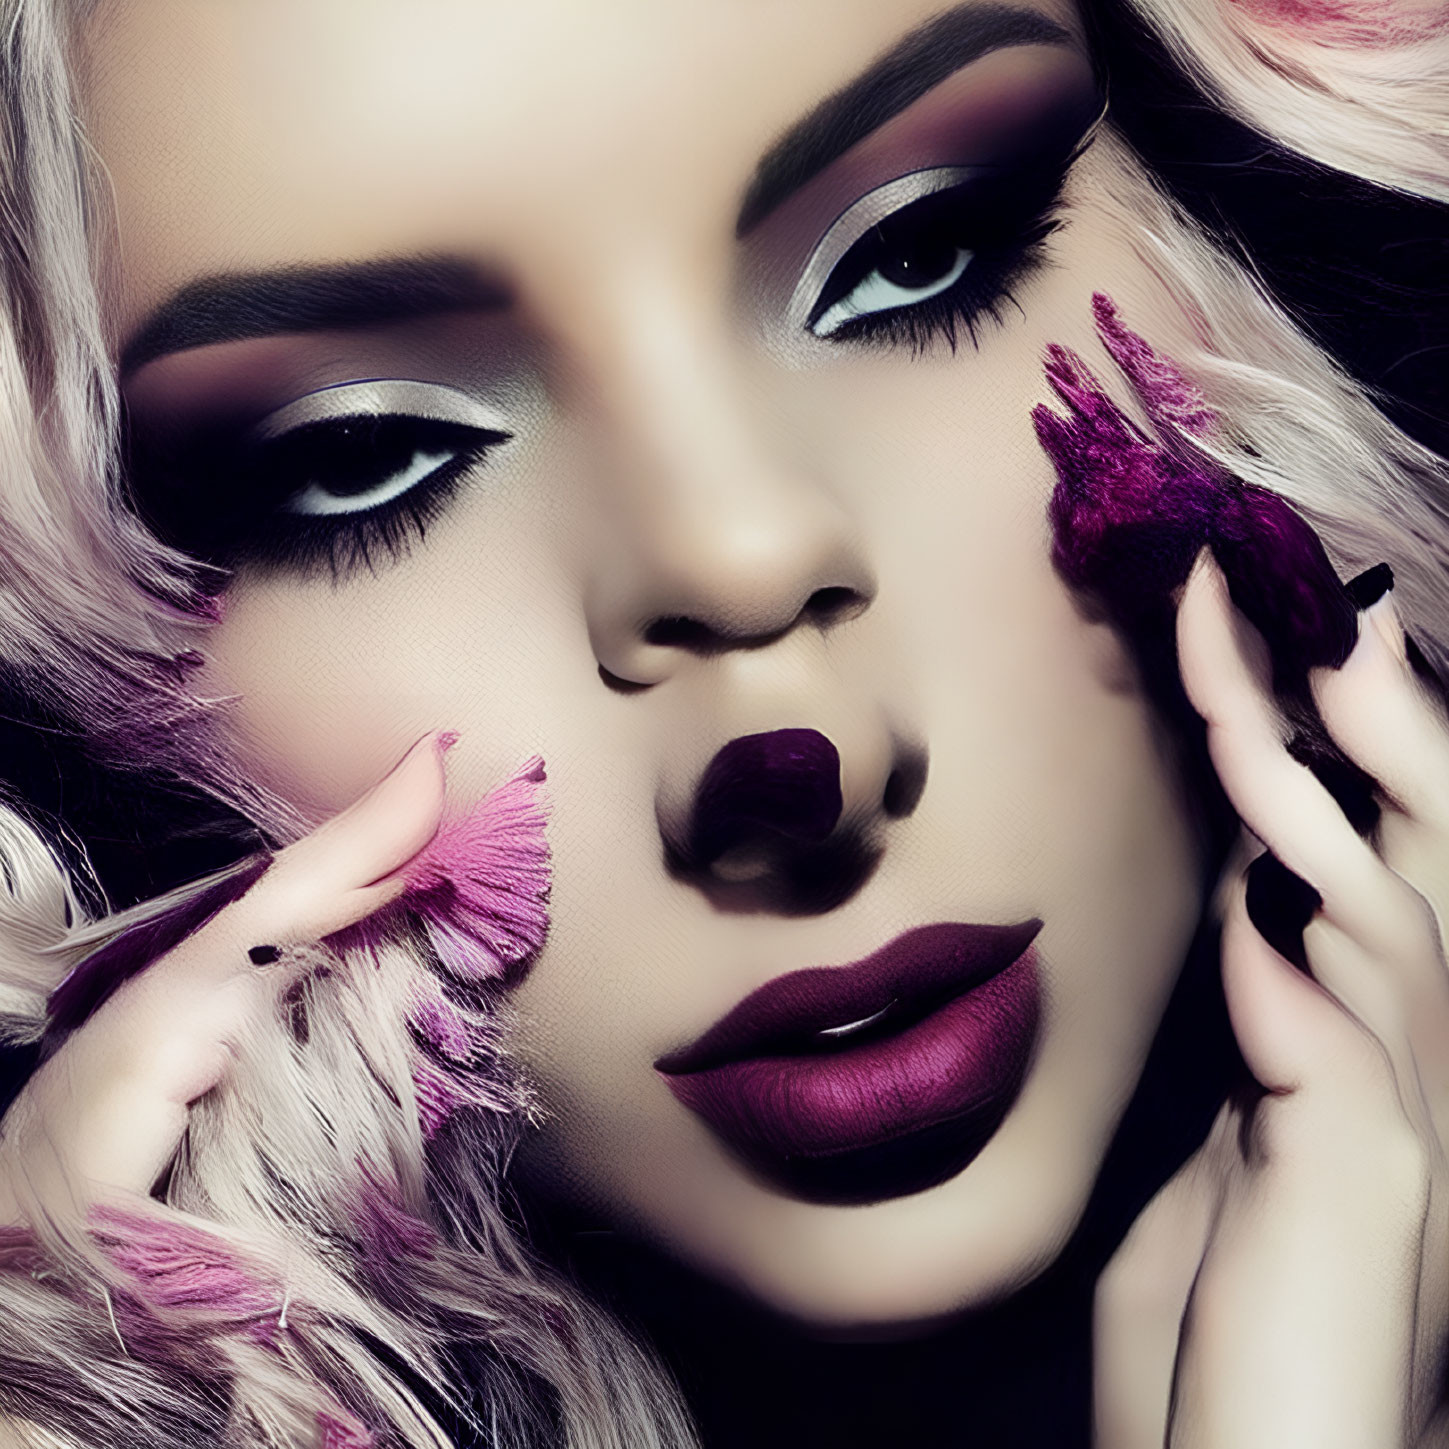 Close-up of woman with purple makeup and lipstick holding flower petals - striking eye makeup and flawless skin